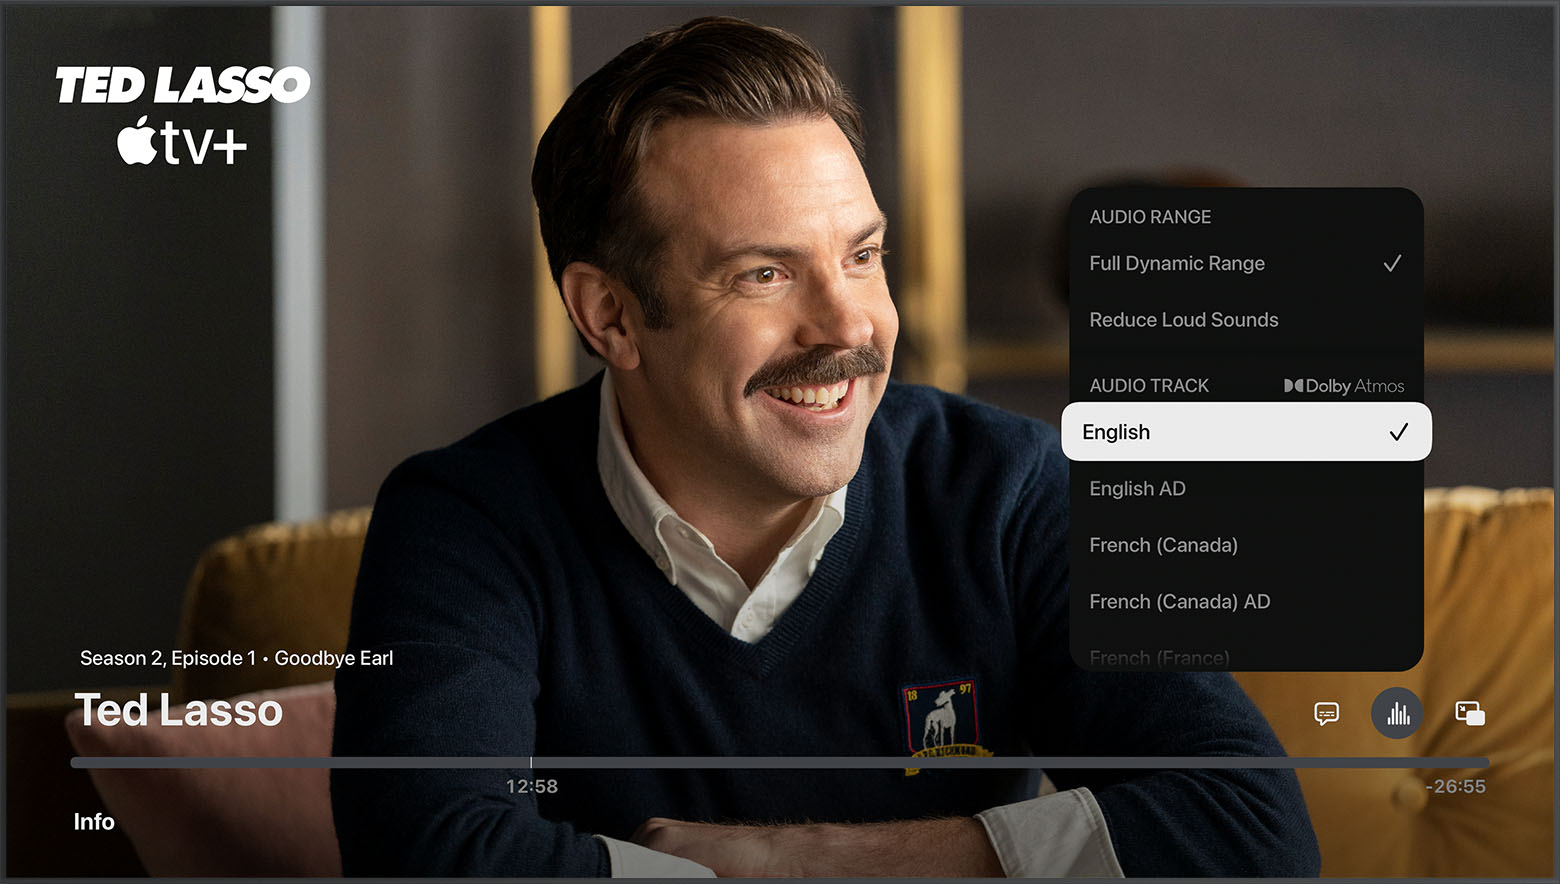 Audio Language options in the Apple TV app on Apple TV, smart TV, or streaming device